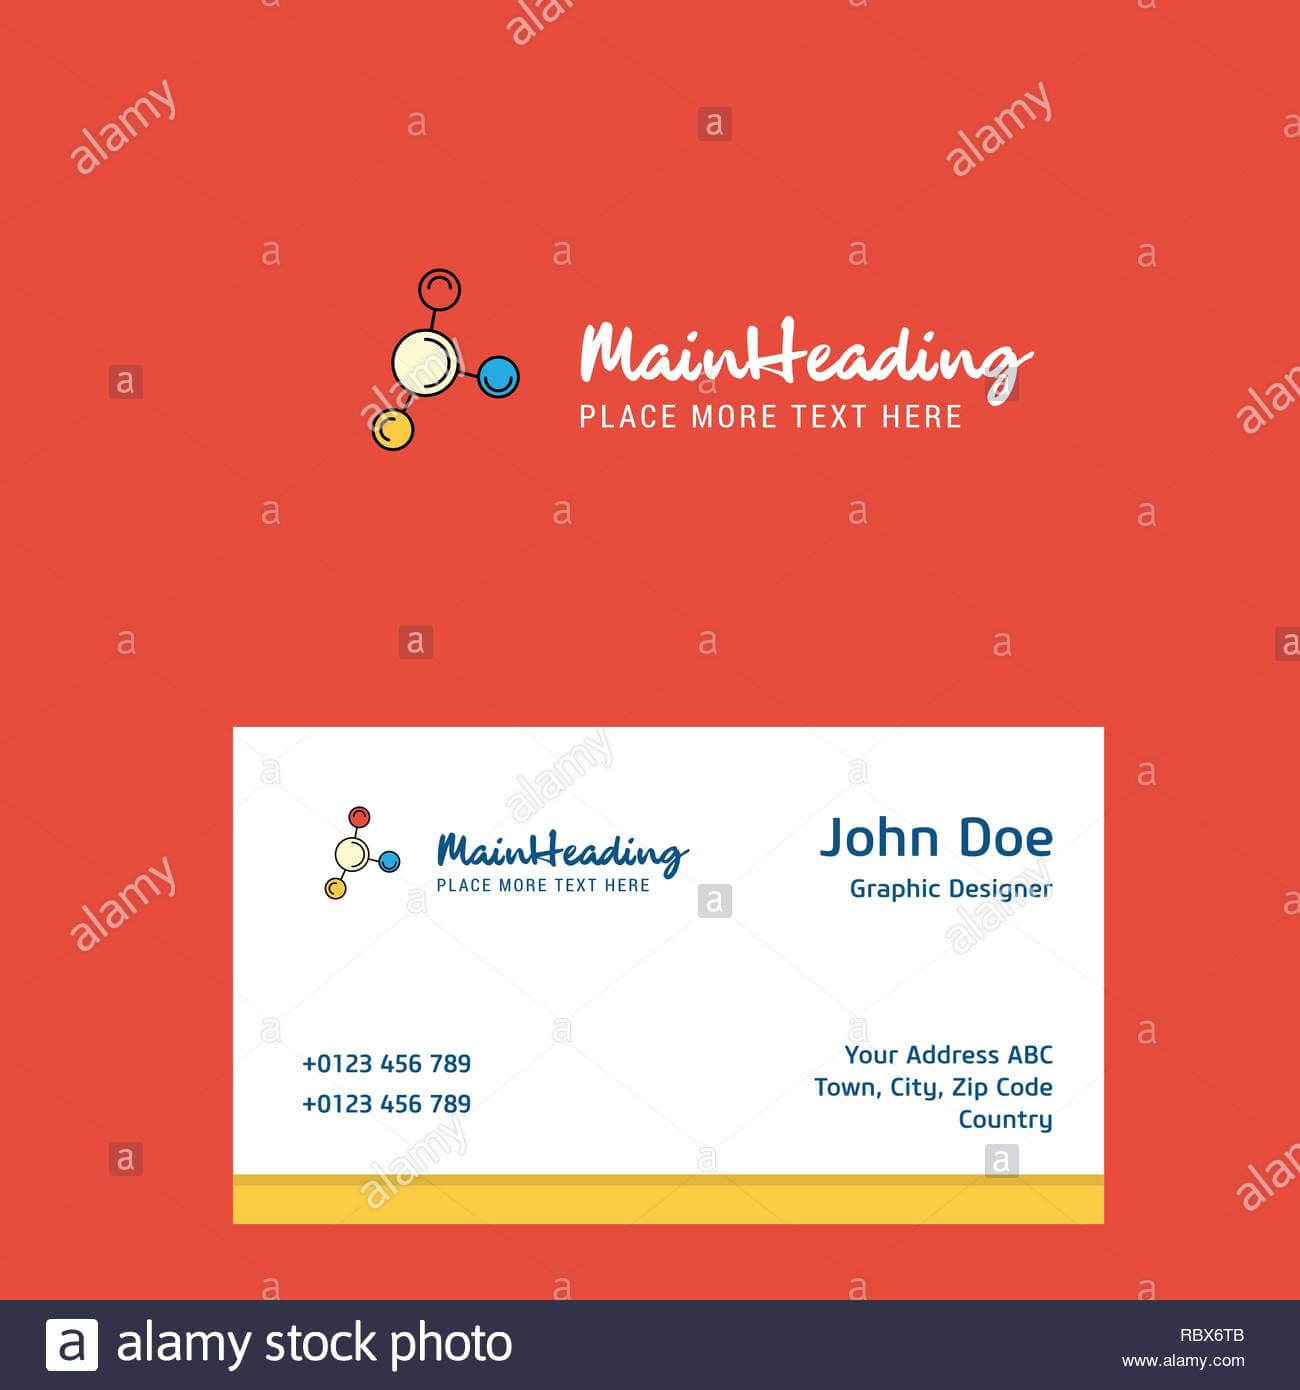 Networking Logo Design With Business Card Template. Elegant In Networking Card Template